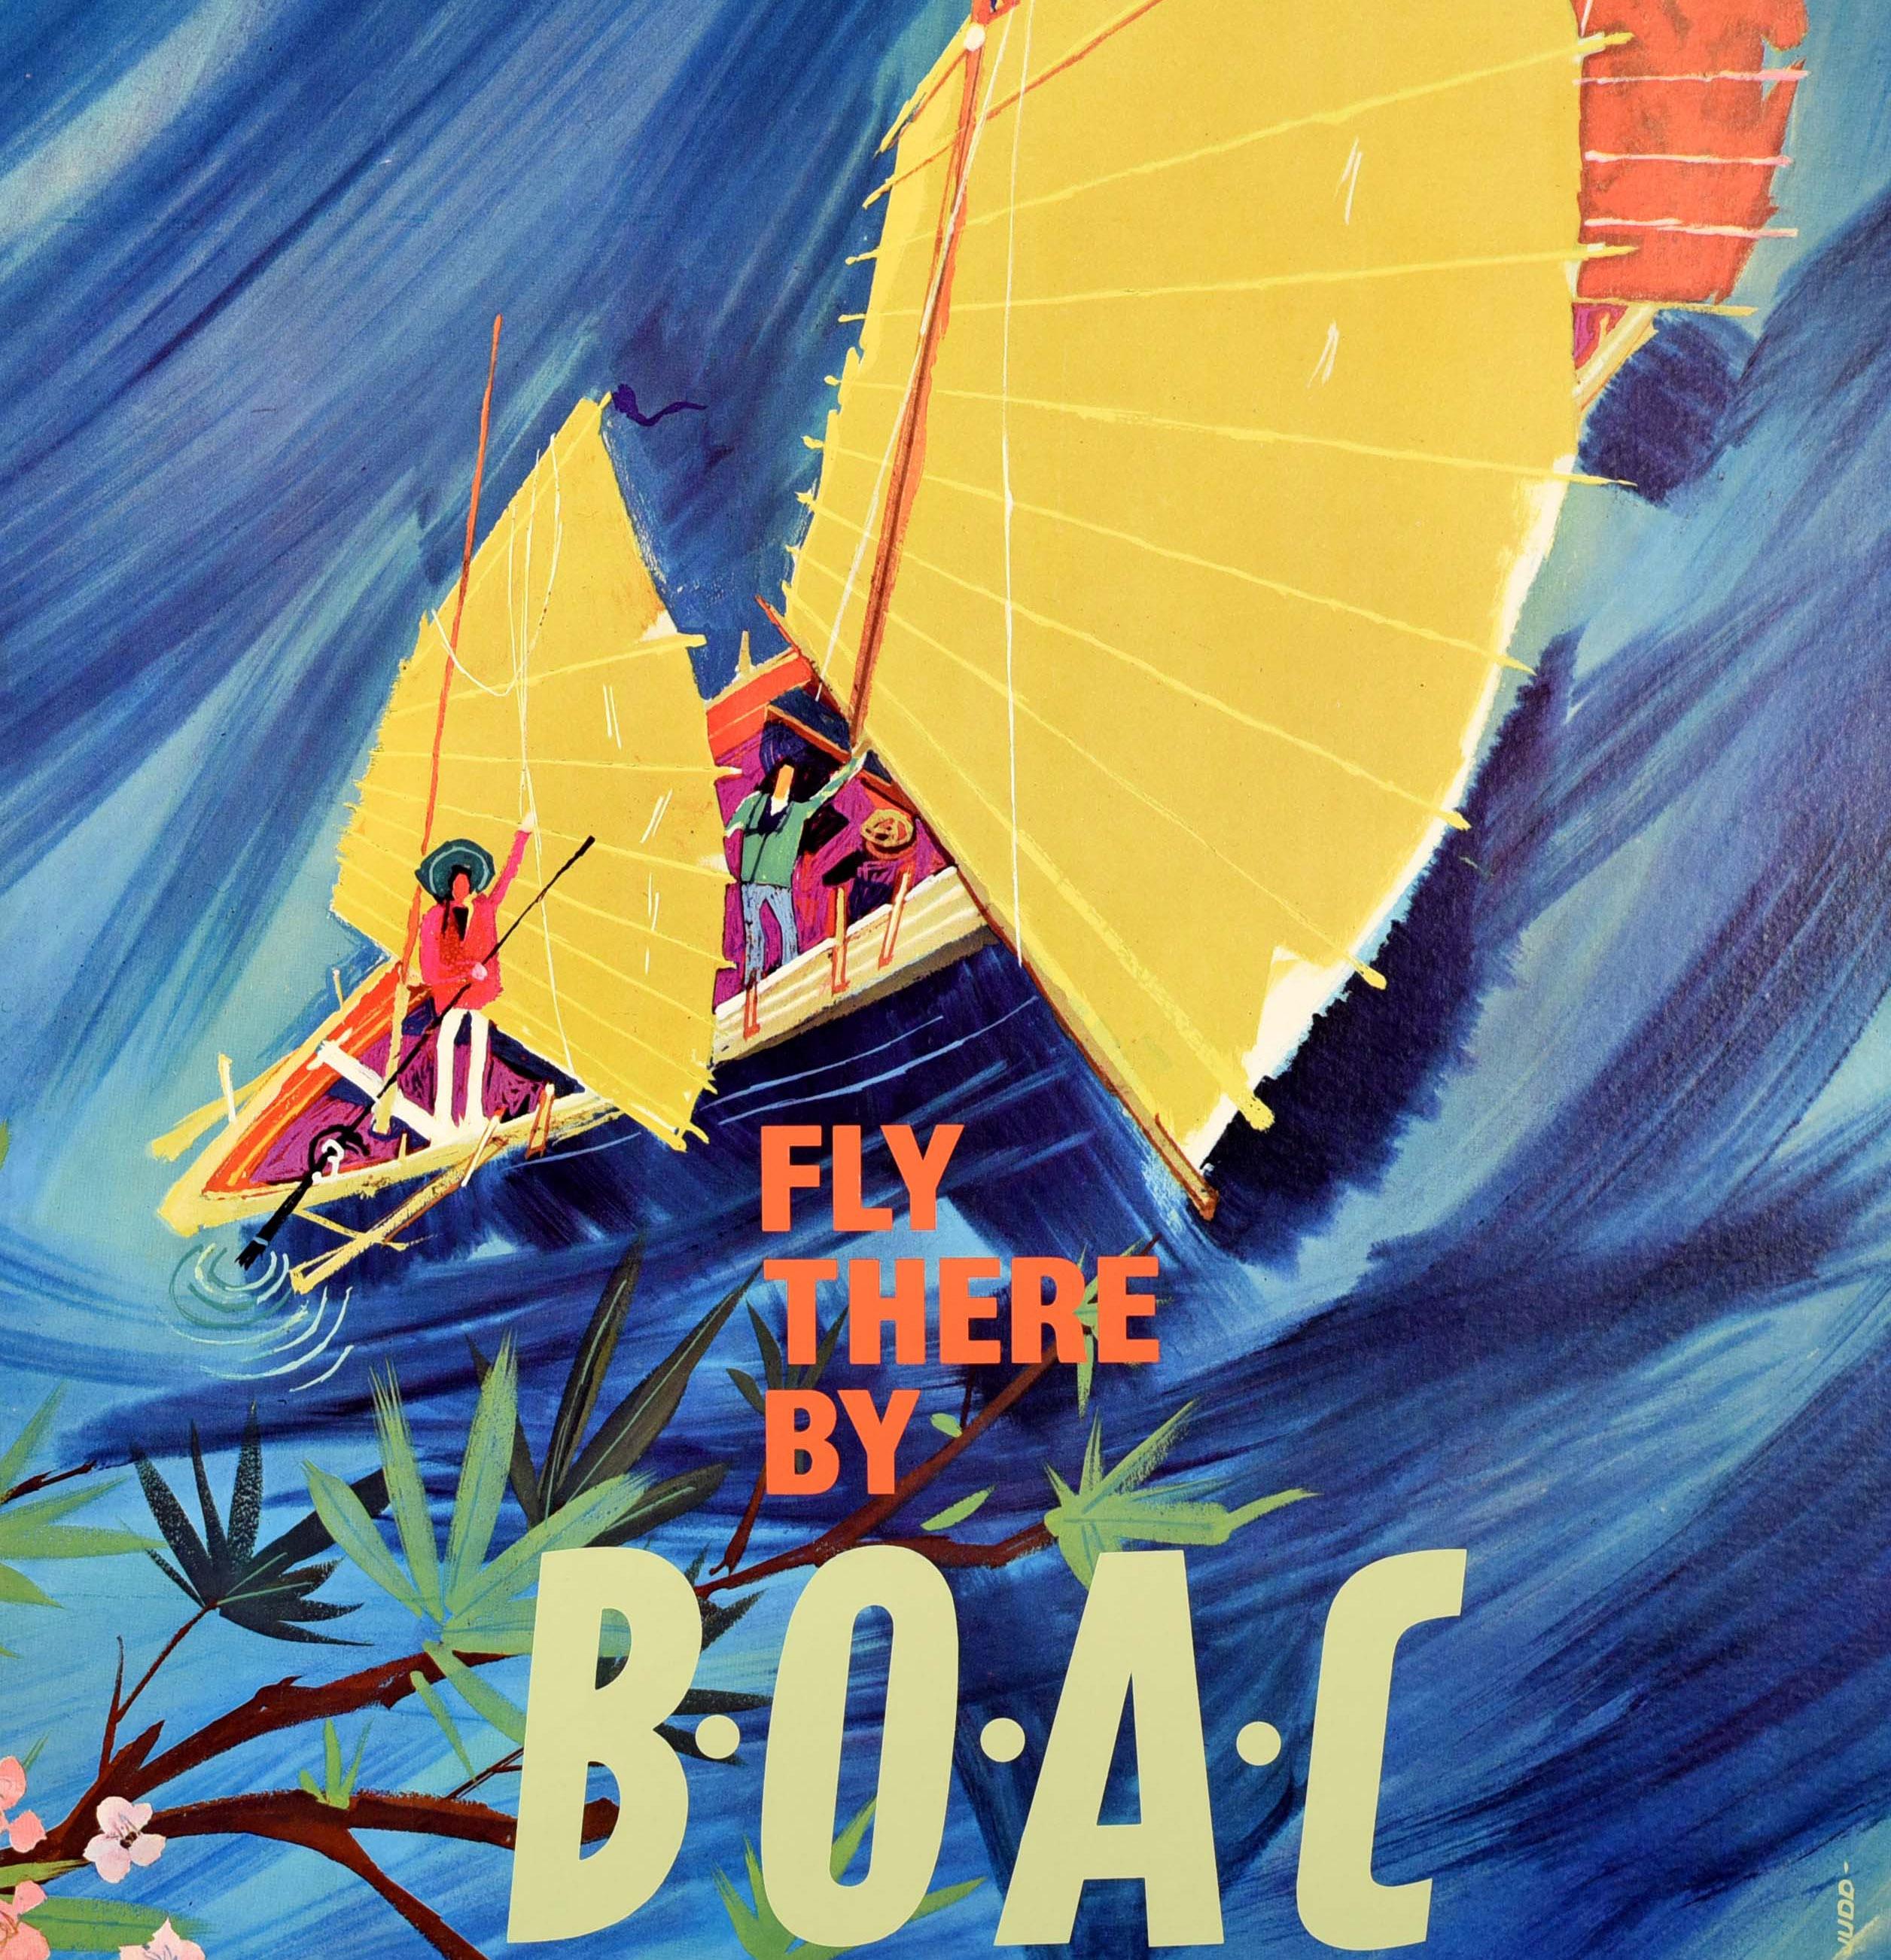 Original vintage poster advertising travel to the Orient / Asia - Fly There By BOAC. Colourful image of people waving from a traditional Hong Kong style junk boat in full sail against a sweeping blue background with pink flowers on a branch behind